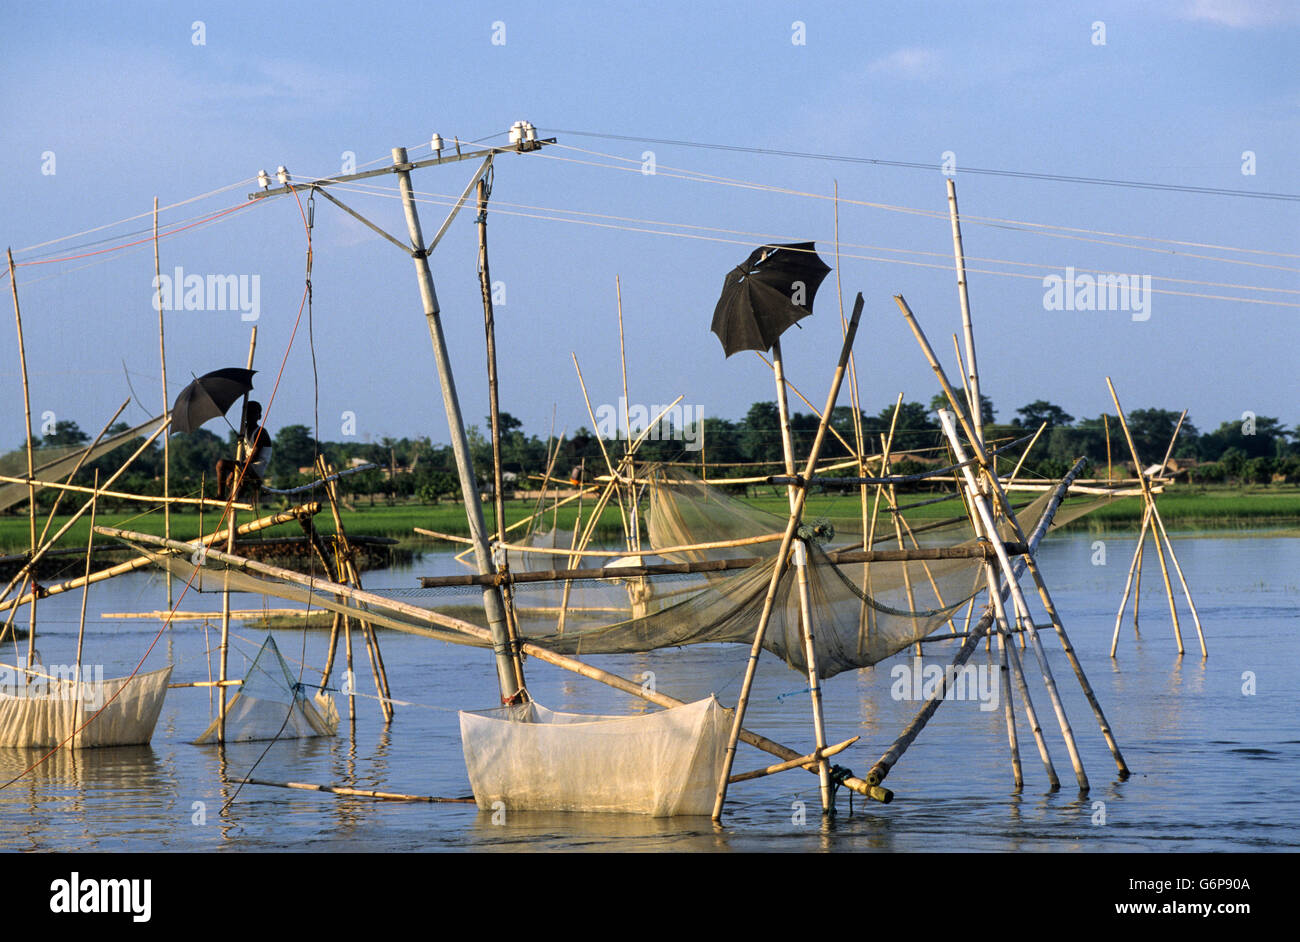 INDIA Bihar, submergence at Bagmati river a branch of Ganges / Ganga River due to heavy monsoon rains and melting Himalaya glaciers, people fishing on temporary bamboo construction, fishing net Stock Photo